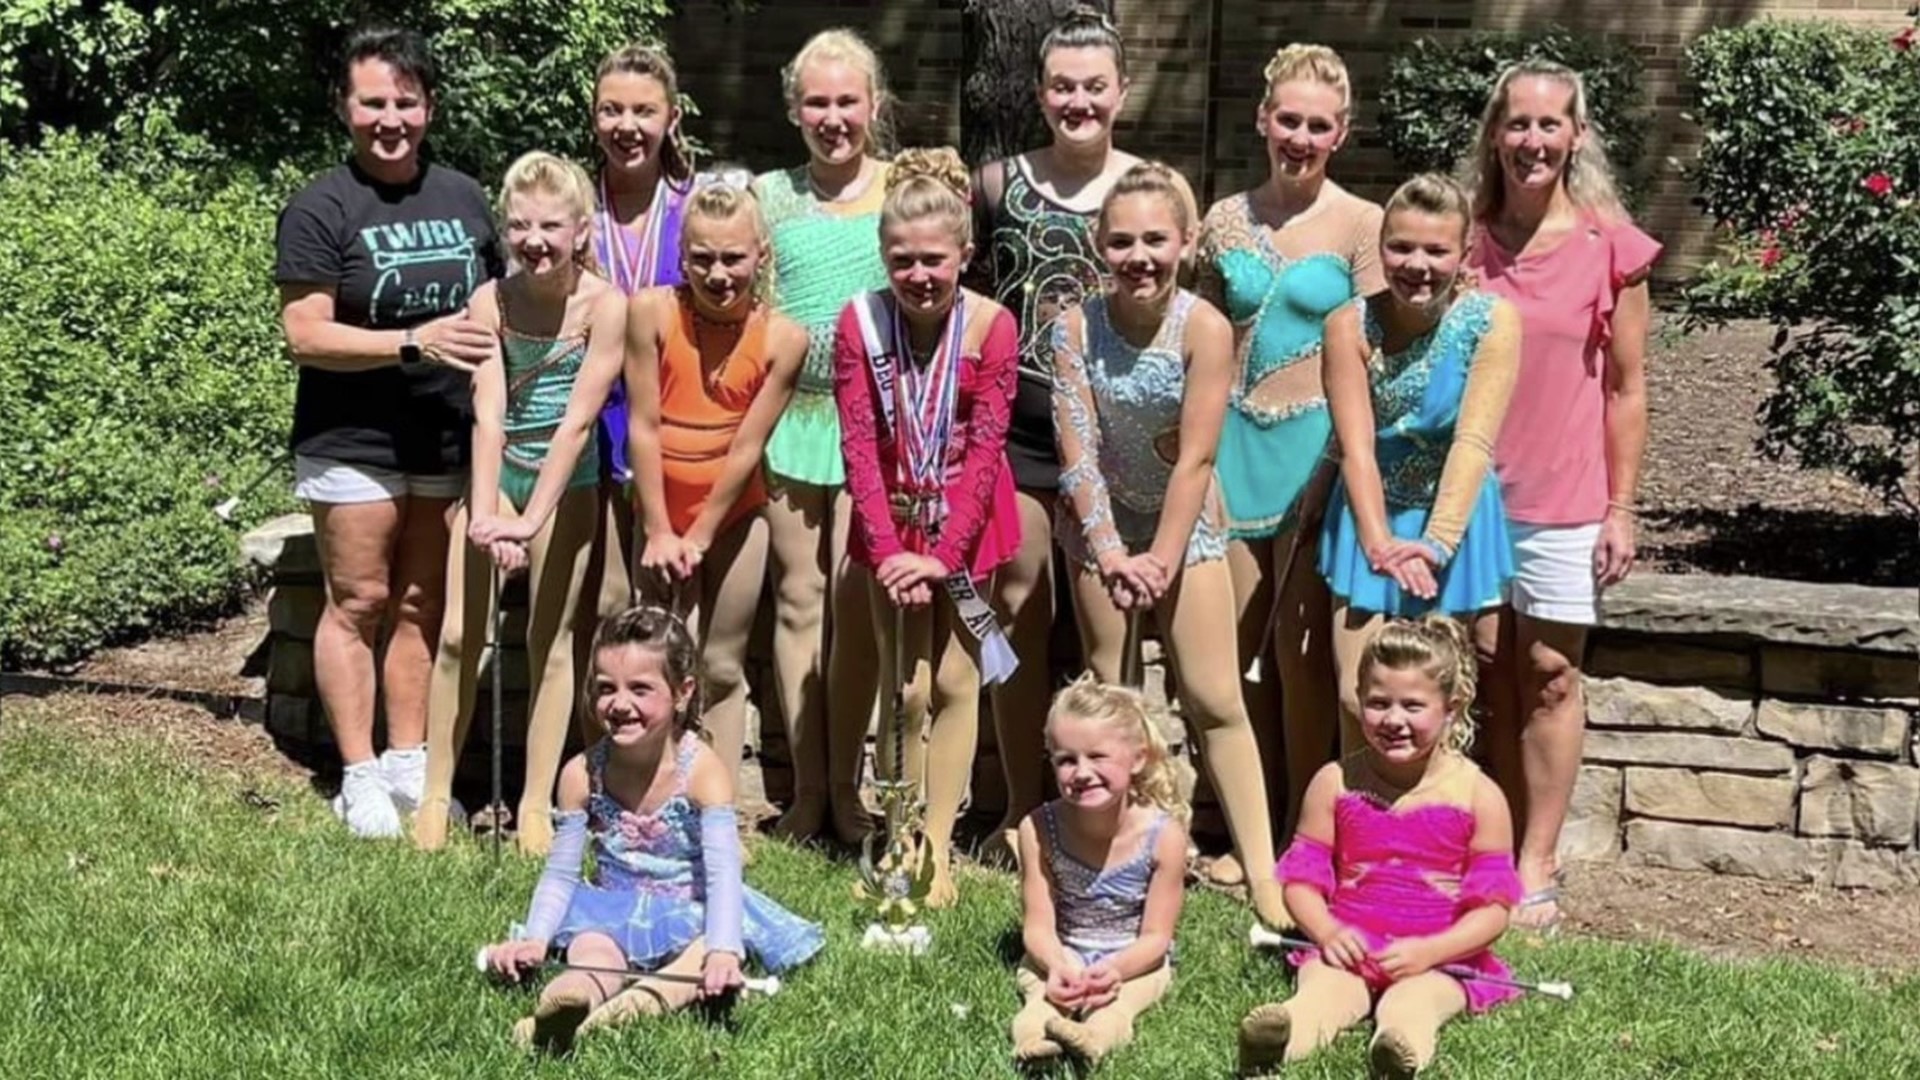 A twirling group known as the Marshaletts recently competed at the national championships in Indiana.